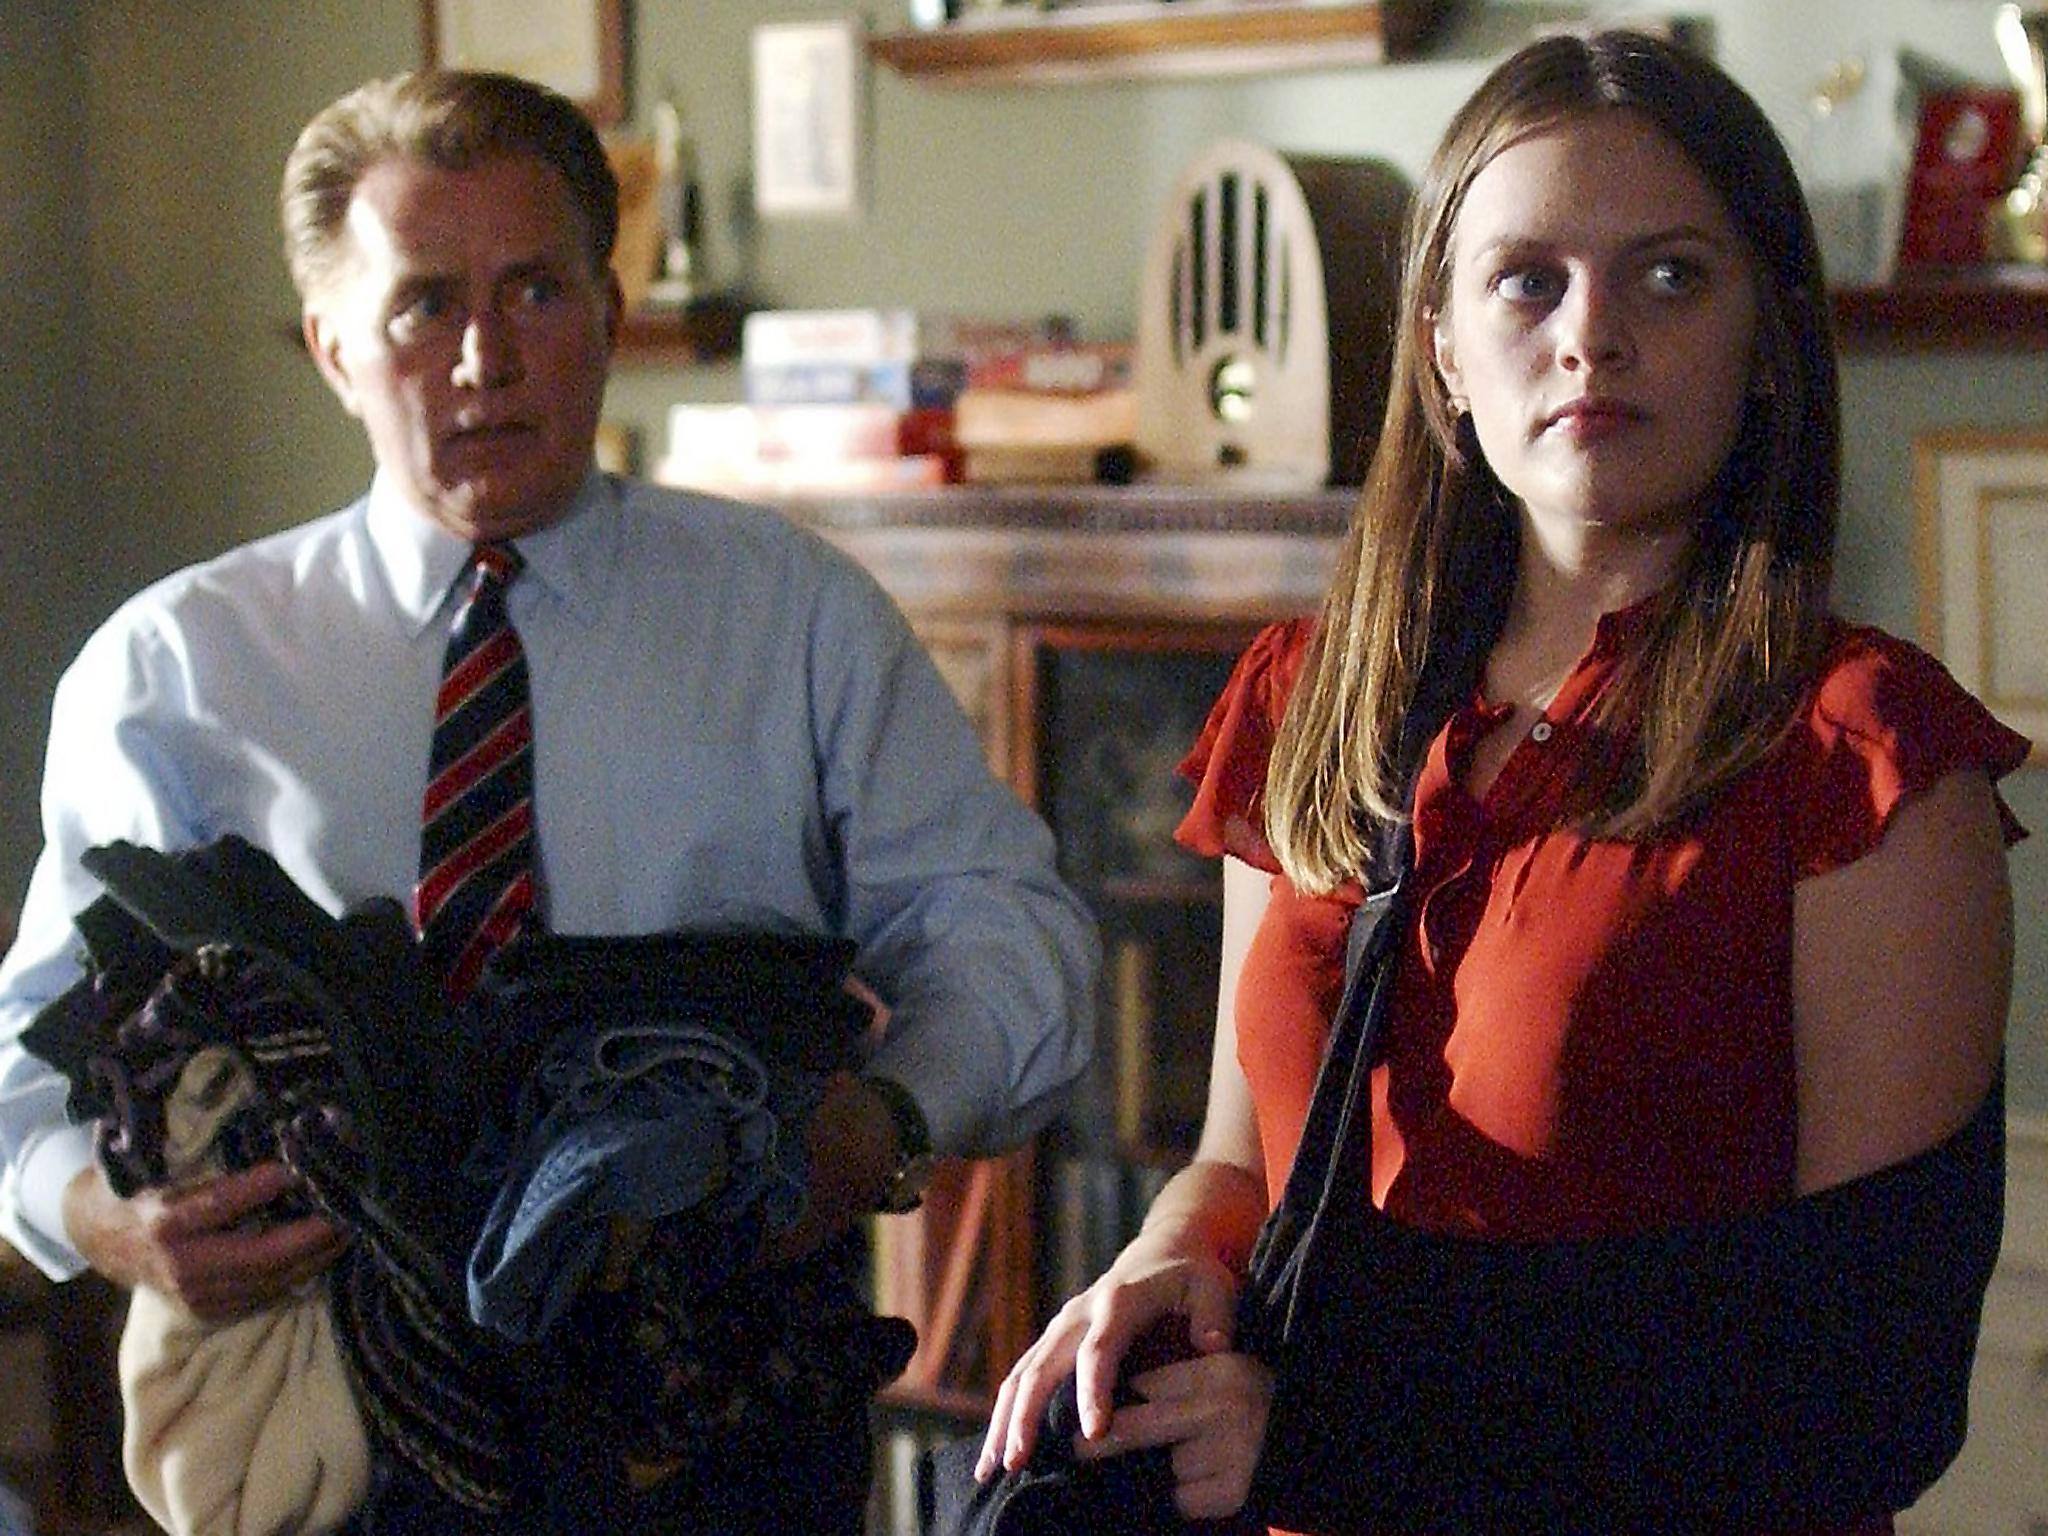 Moss as Zoey Bartlet in 'The West Wing' with Martin Sheen as her father, the president (NBC via Getty)